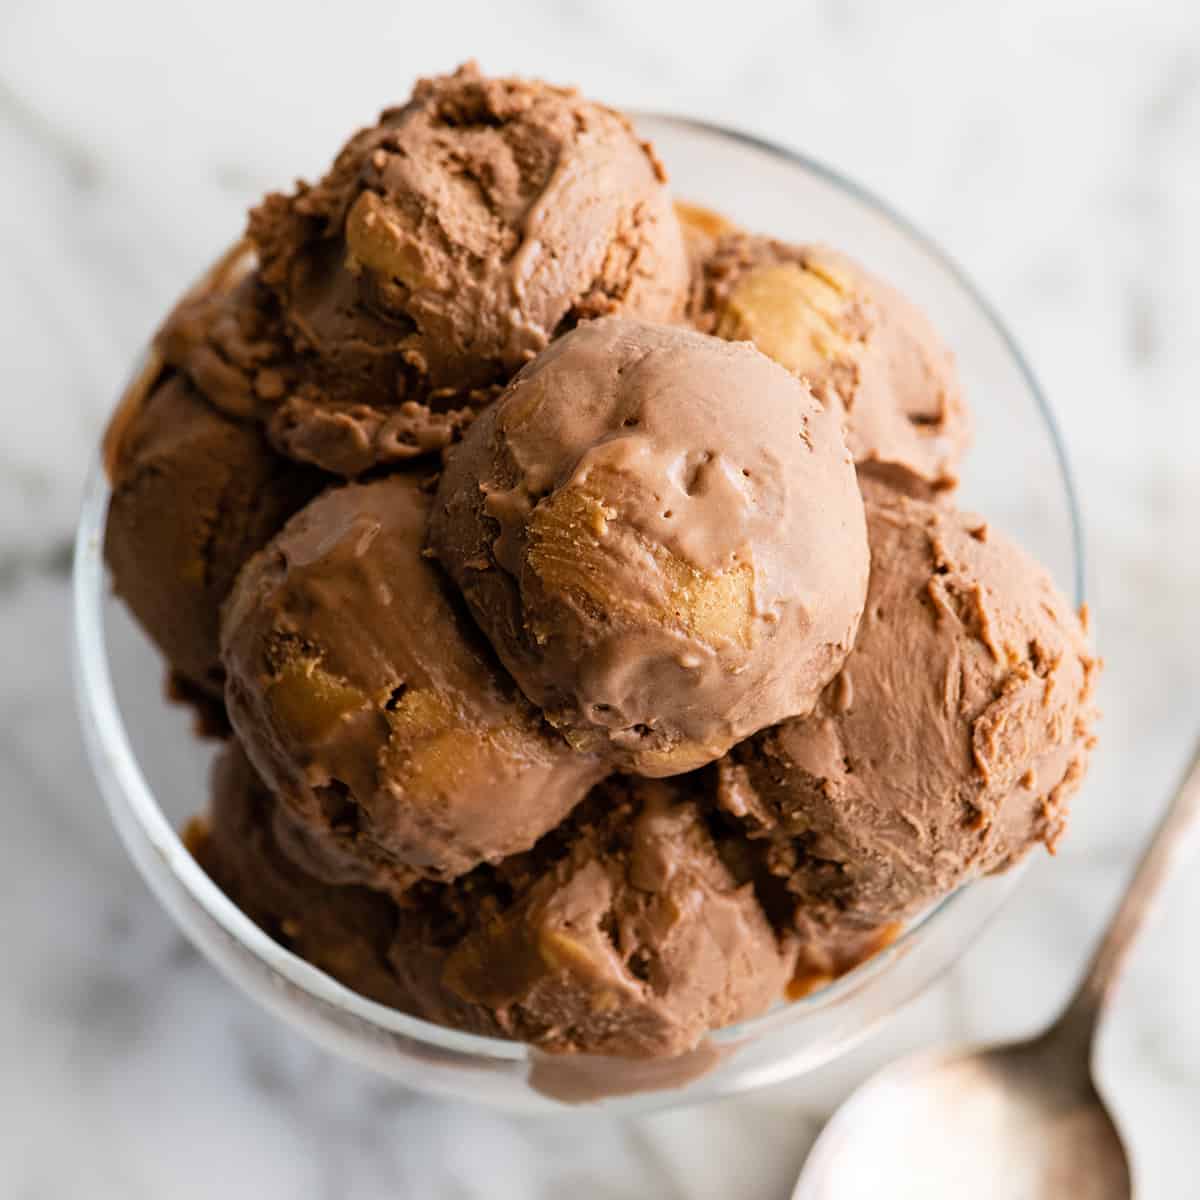 scoop of Homemade Chocolate Peanut Butter Ice Cream in a glass dish